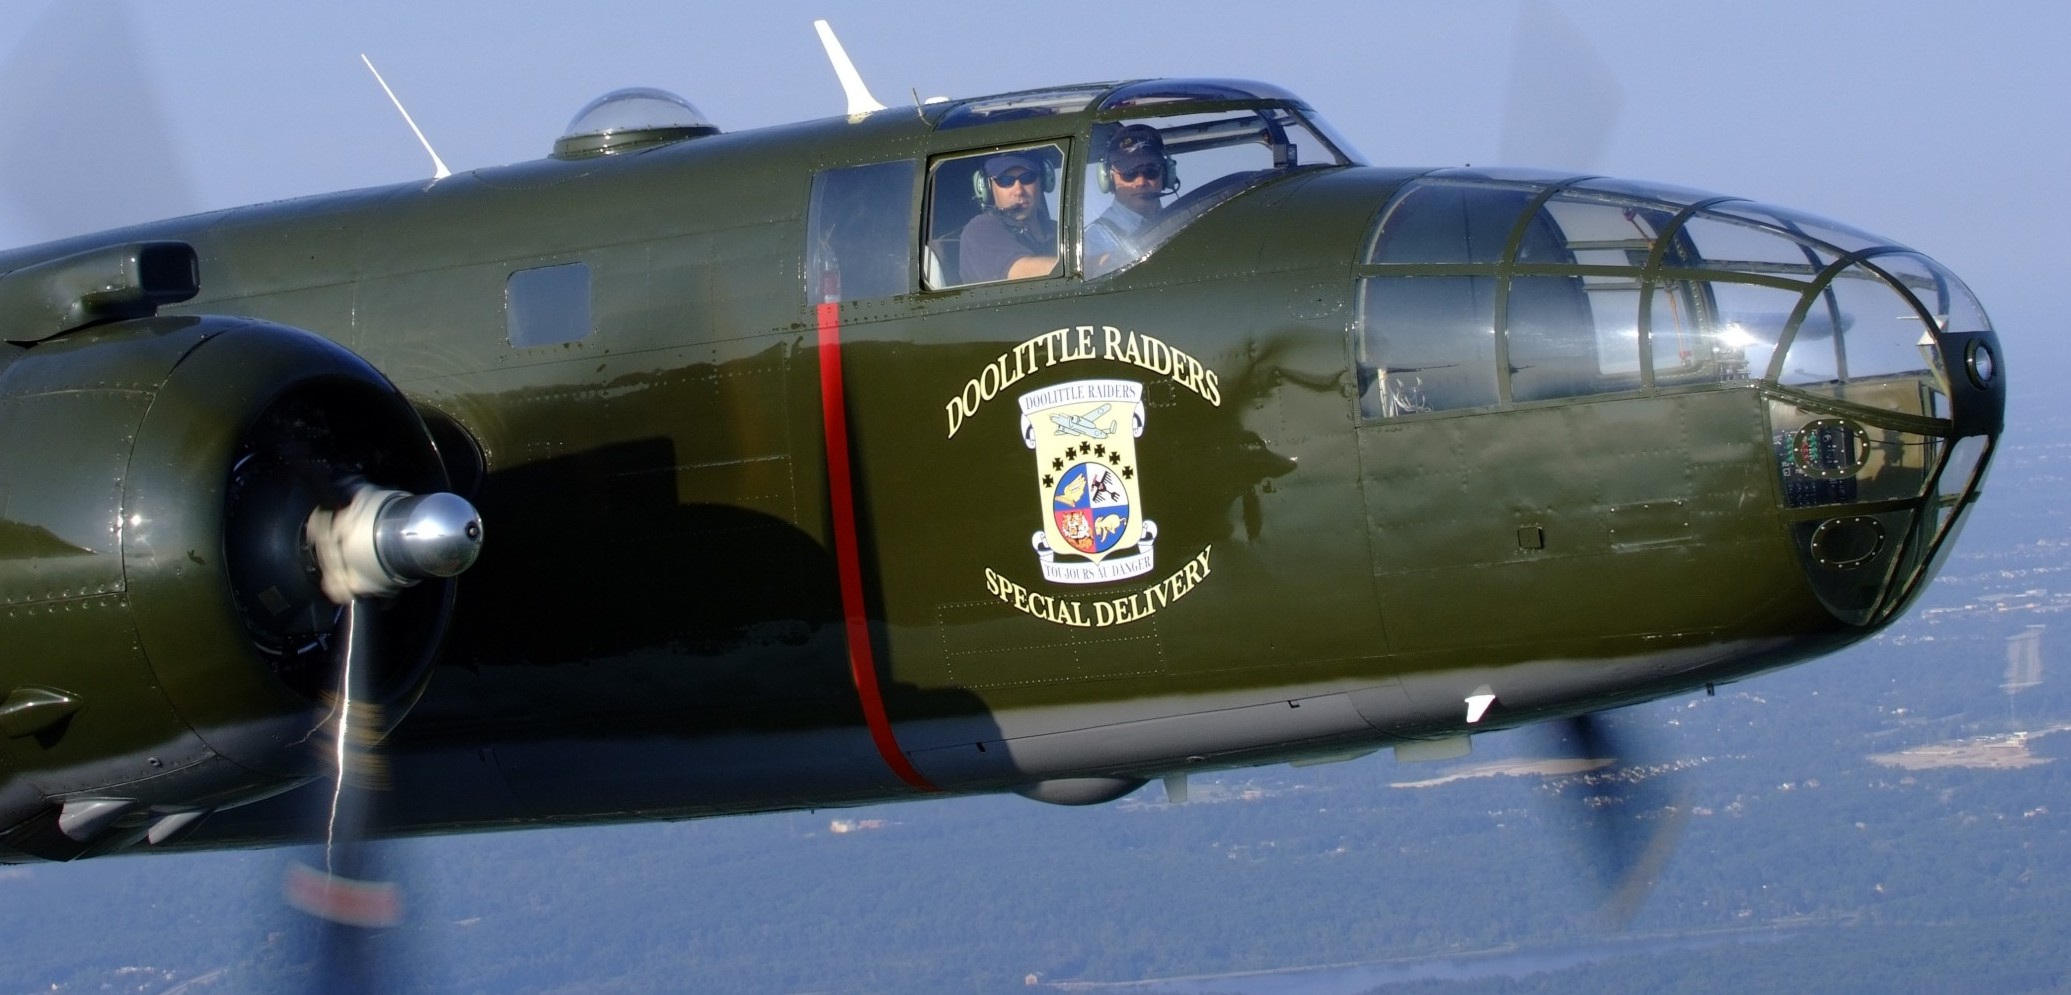 Dressed up to represent a Mitchell from the Doolittle Raid, the Lonestar Flight Museum's B-25 will be performing at WOH in celebration of the 75th anniversary of America's first raid against the Japanese homeland during WWII. (photo - LSFM)